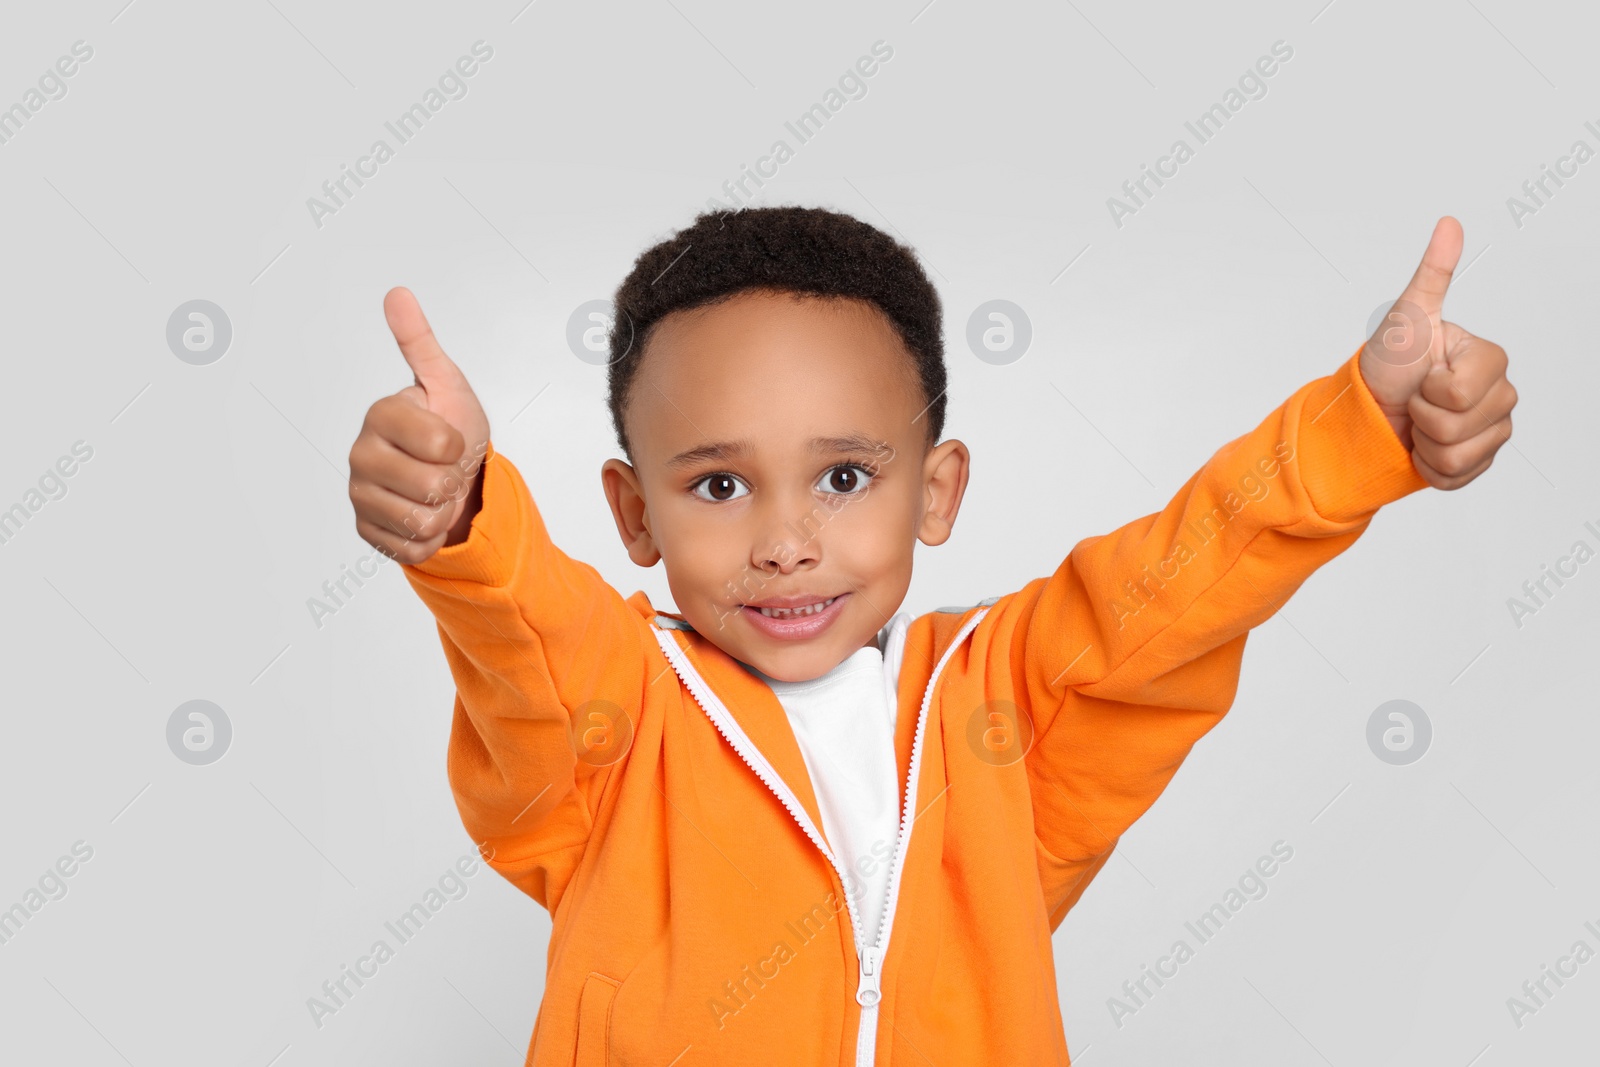 Photo of African-American boy showing thumbs up on light grey background